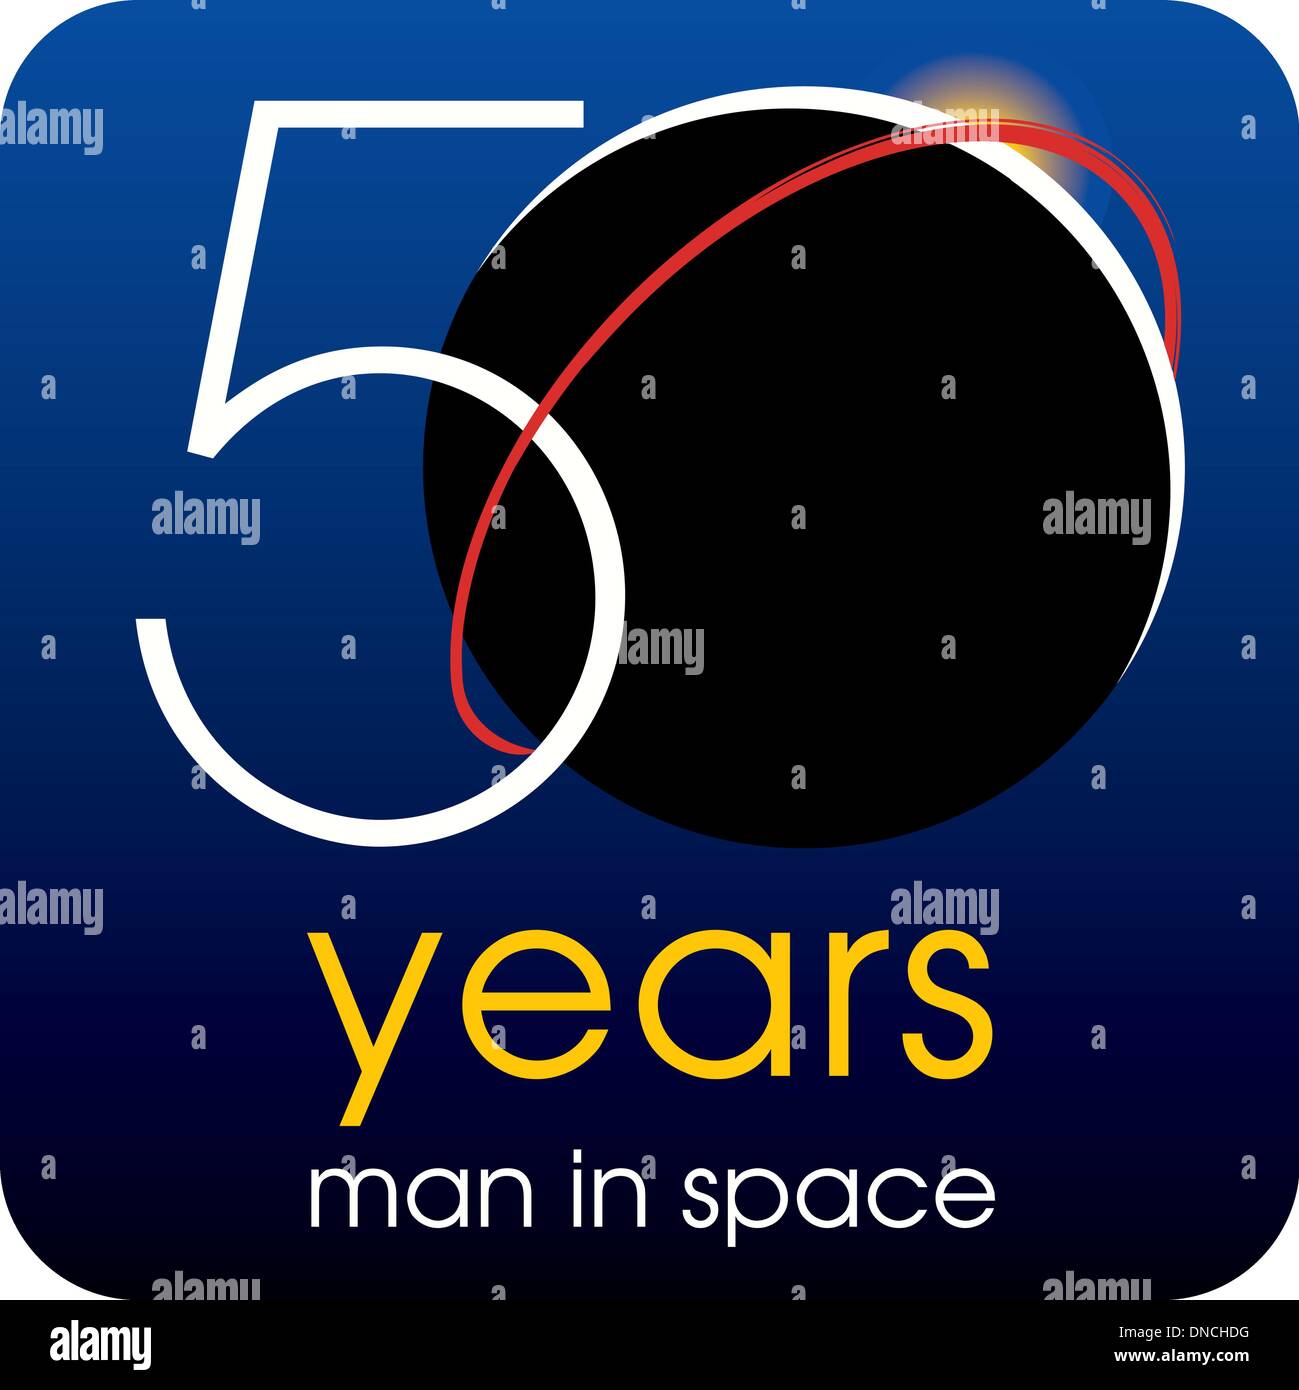 50 years man in space Stock Vector